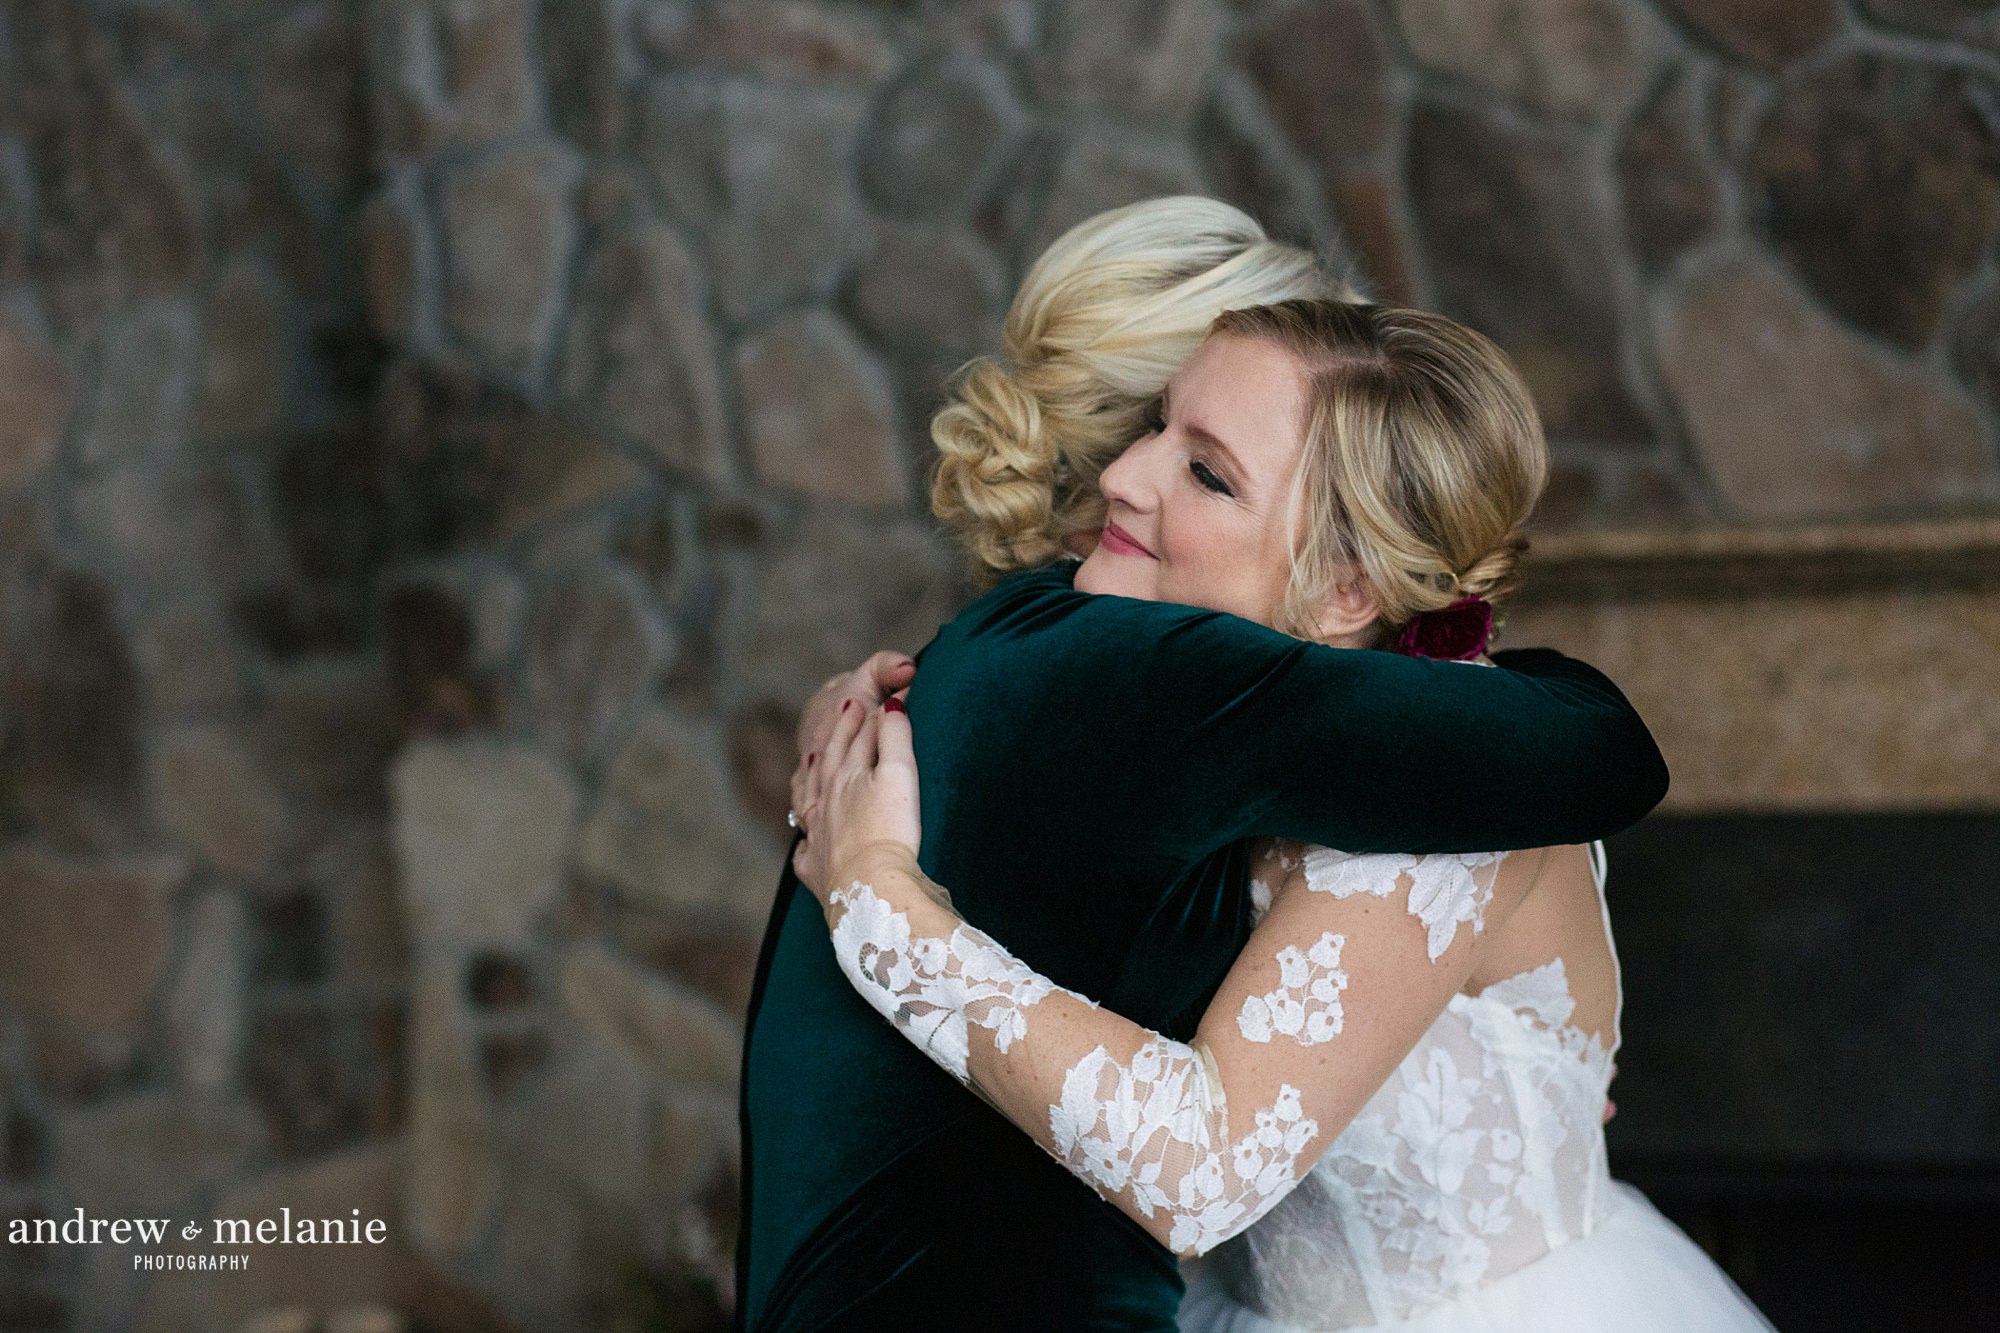 winter wedding details for mountain wedding at Squaw valley resort in lake tahoe